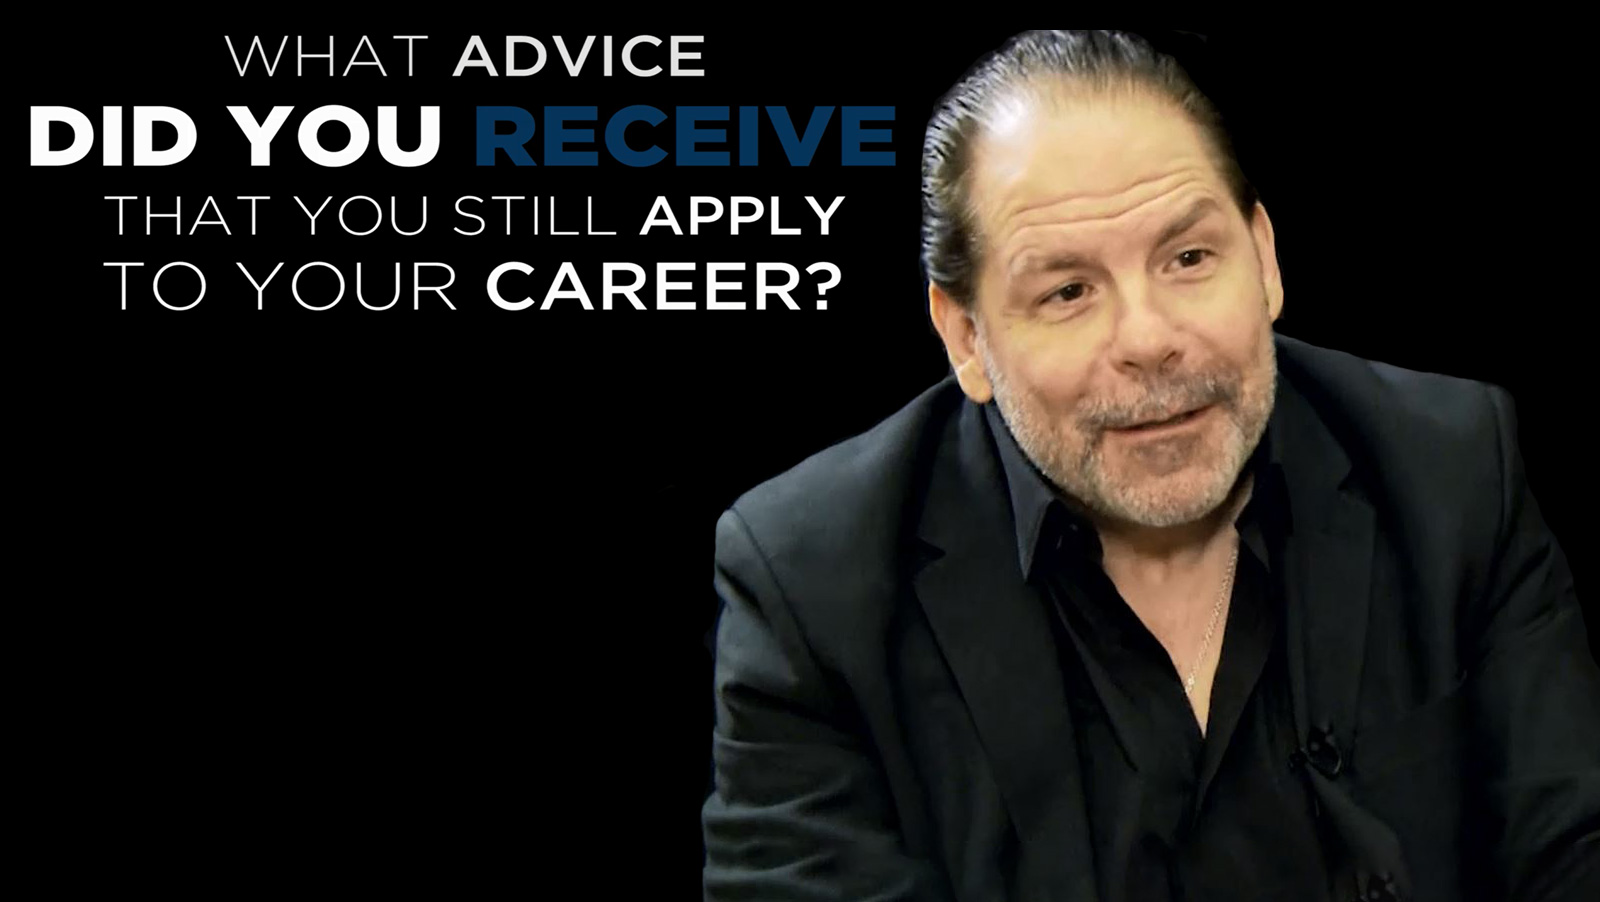 John English: Shared Experience - What advice did you receive that still apply to your career?